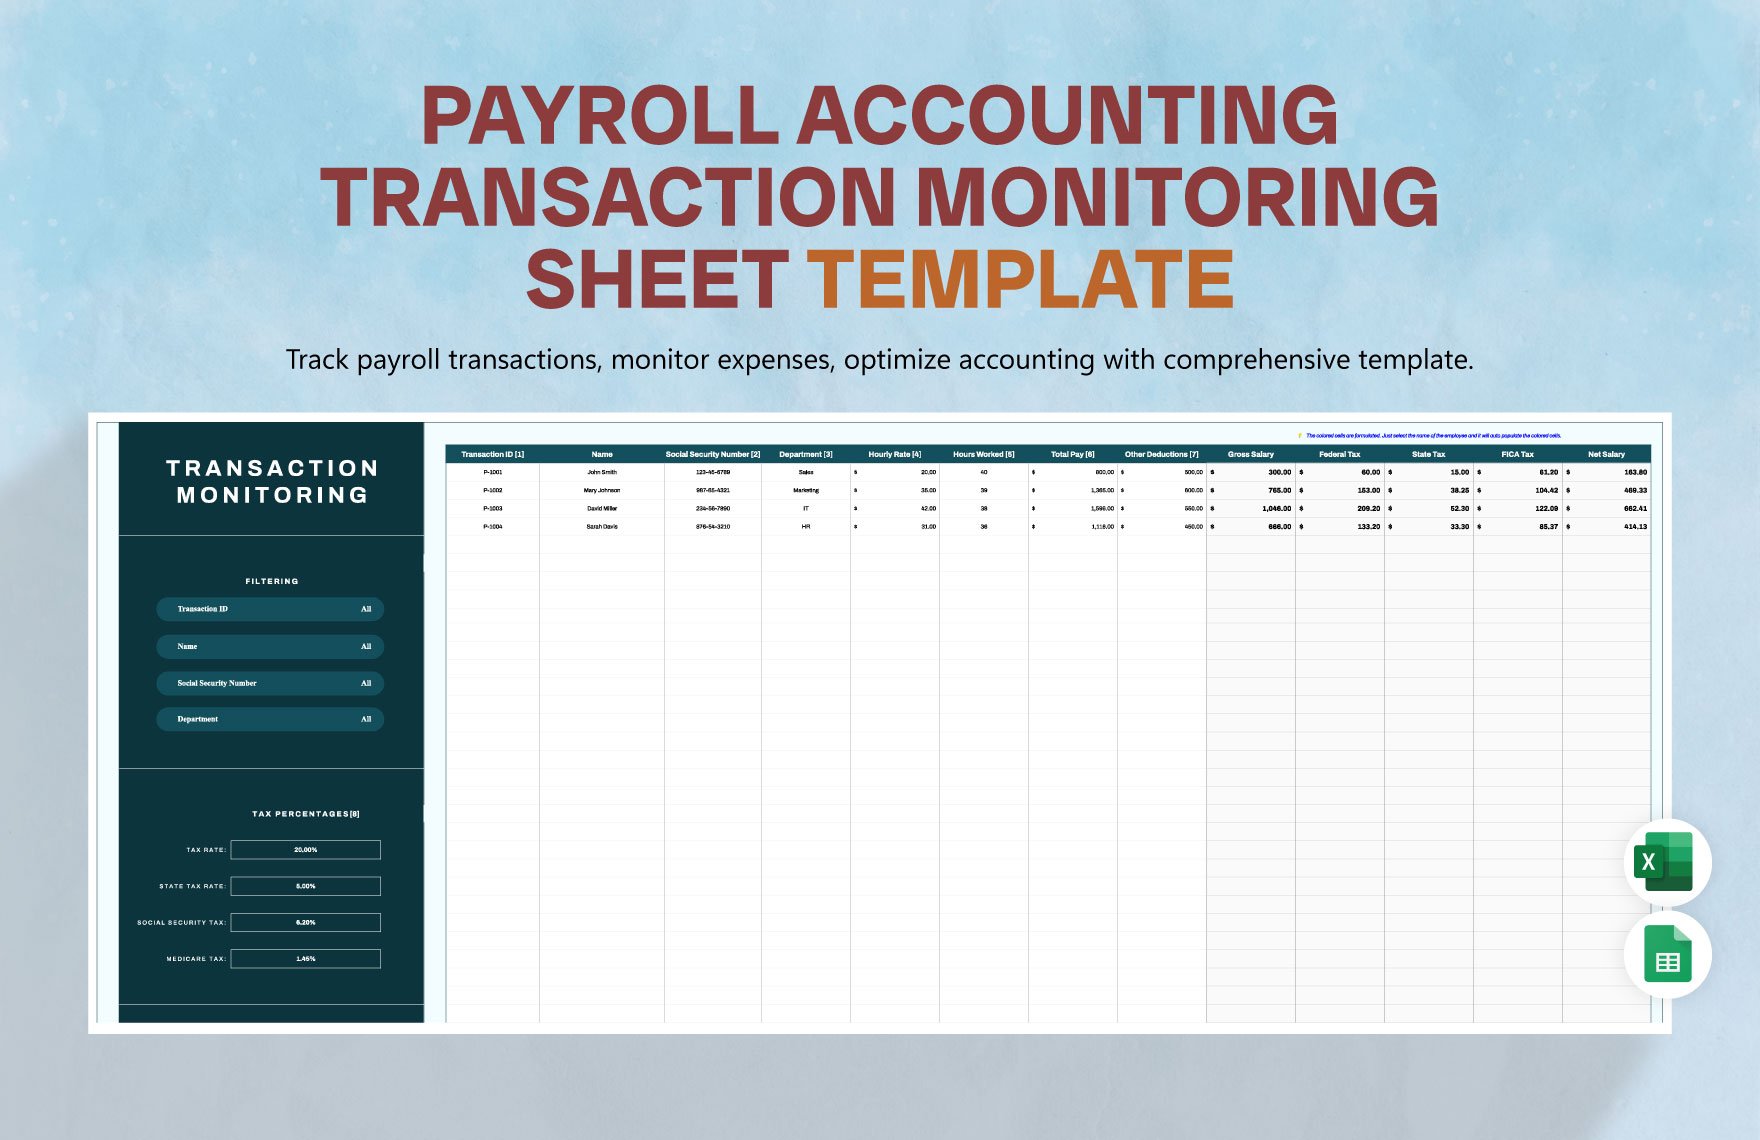 Payroll Accounting Transaction Monitoring Sheet Template in Excel, Google Sheets